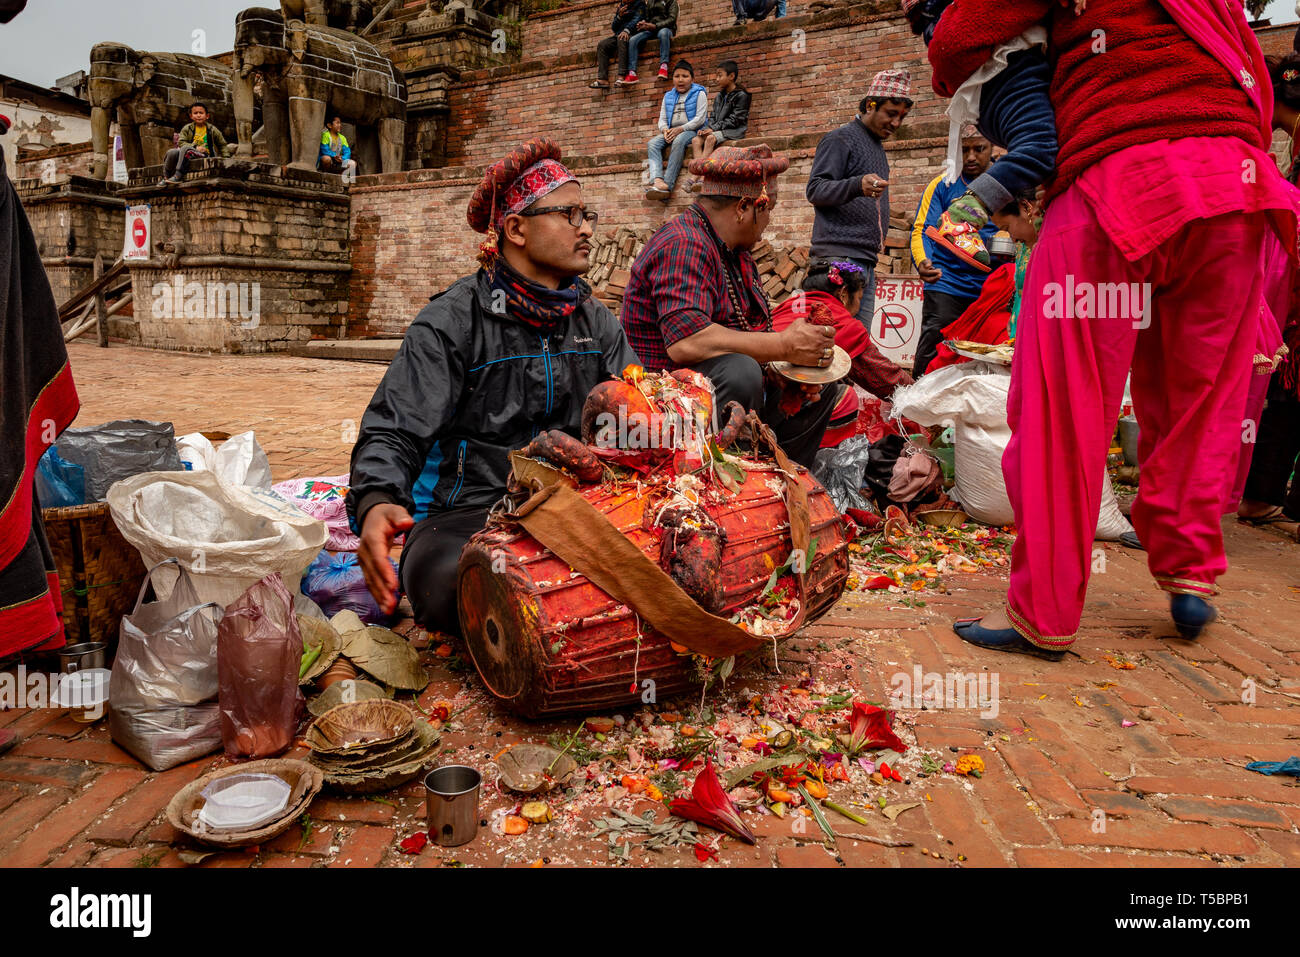 BHAKTAPUR, NEPAL - APRIL 5, 2019: Group of nepalese musicians wearing traditional hats playing music on a square, taken in an overcast morning in the  Stock Photo